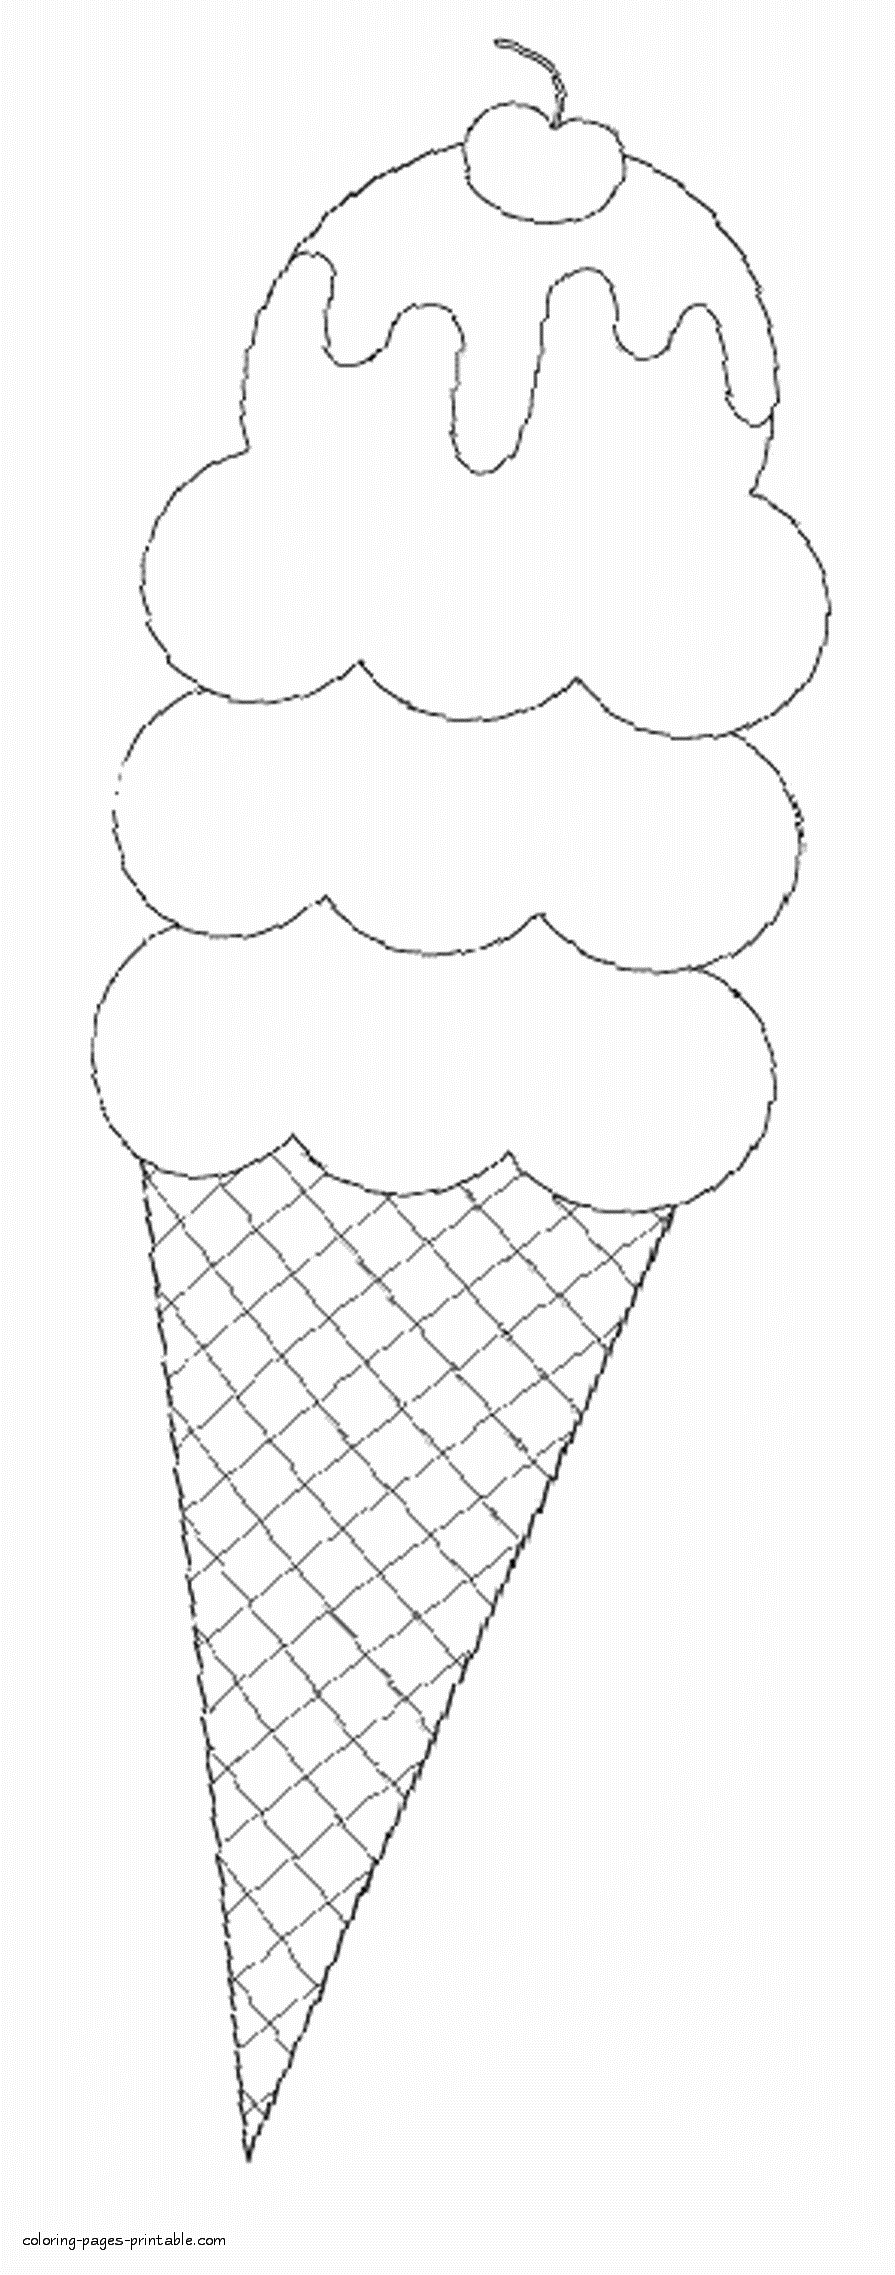 Download The ice cream cone with a cherry coloring page || COLORING ...